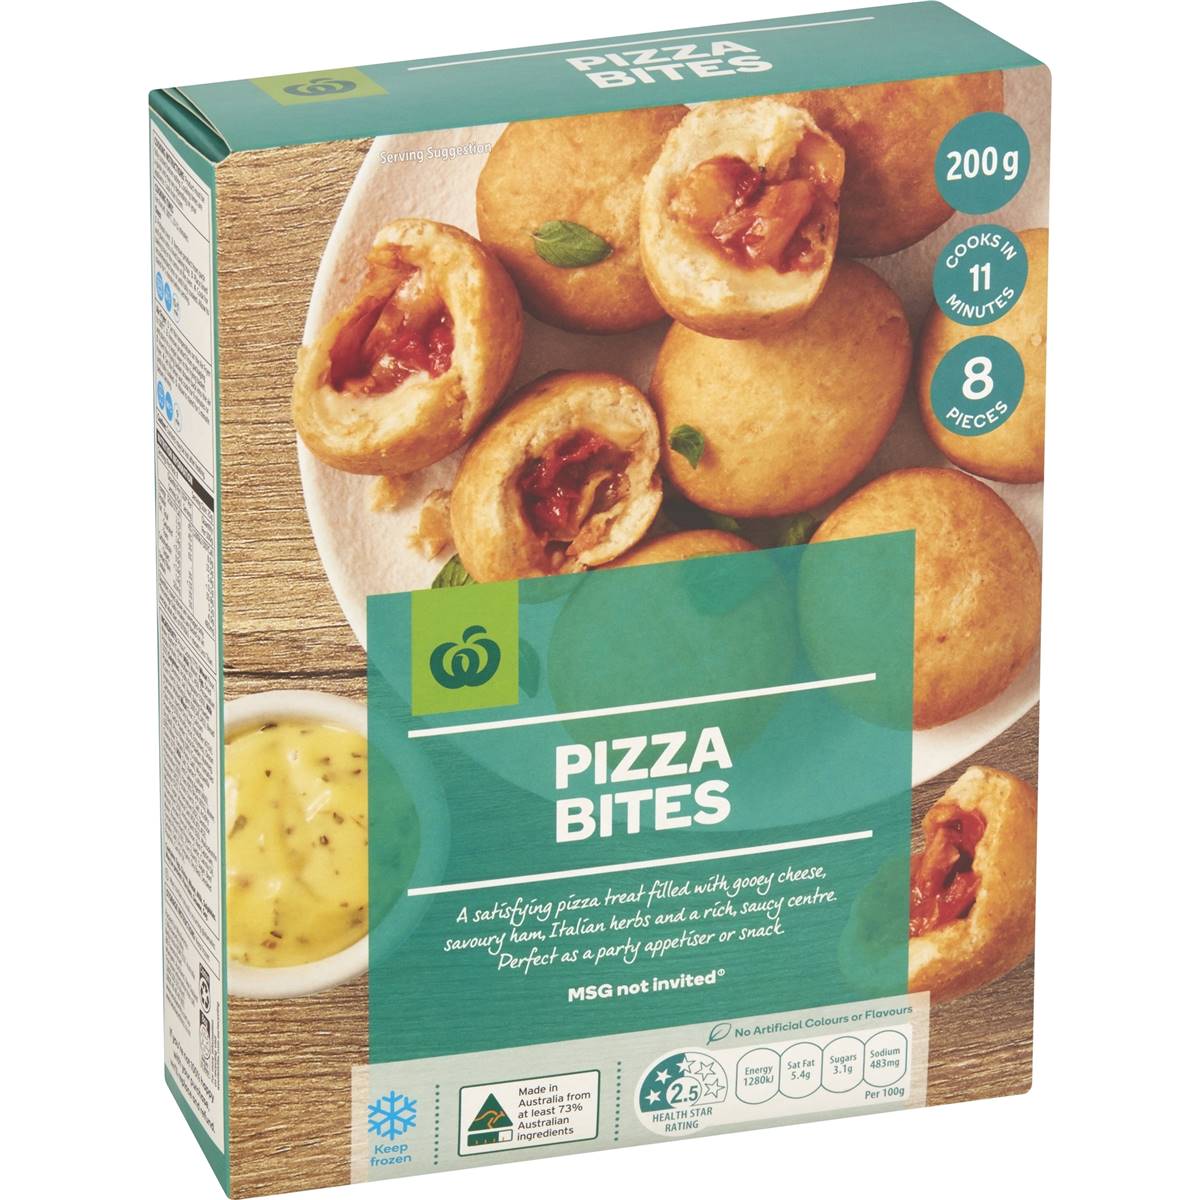 Calories in Woolworths Pizza Bites